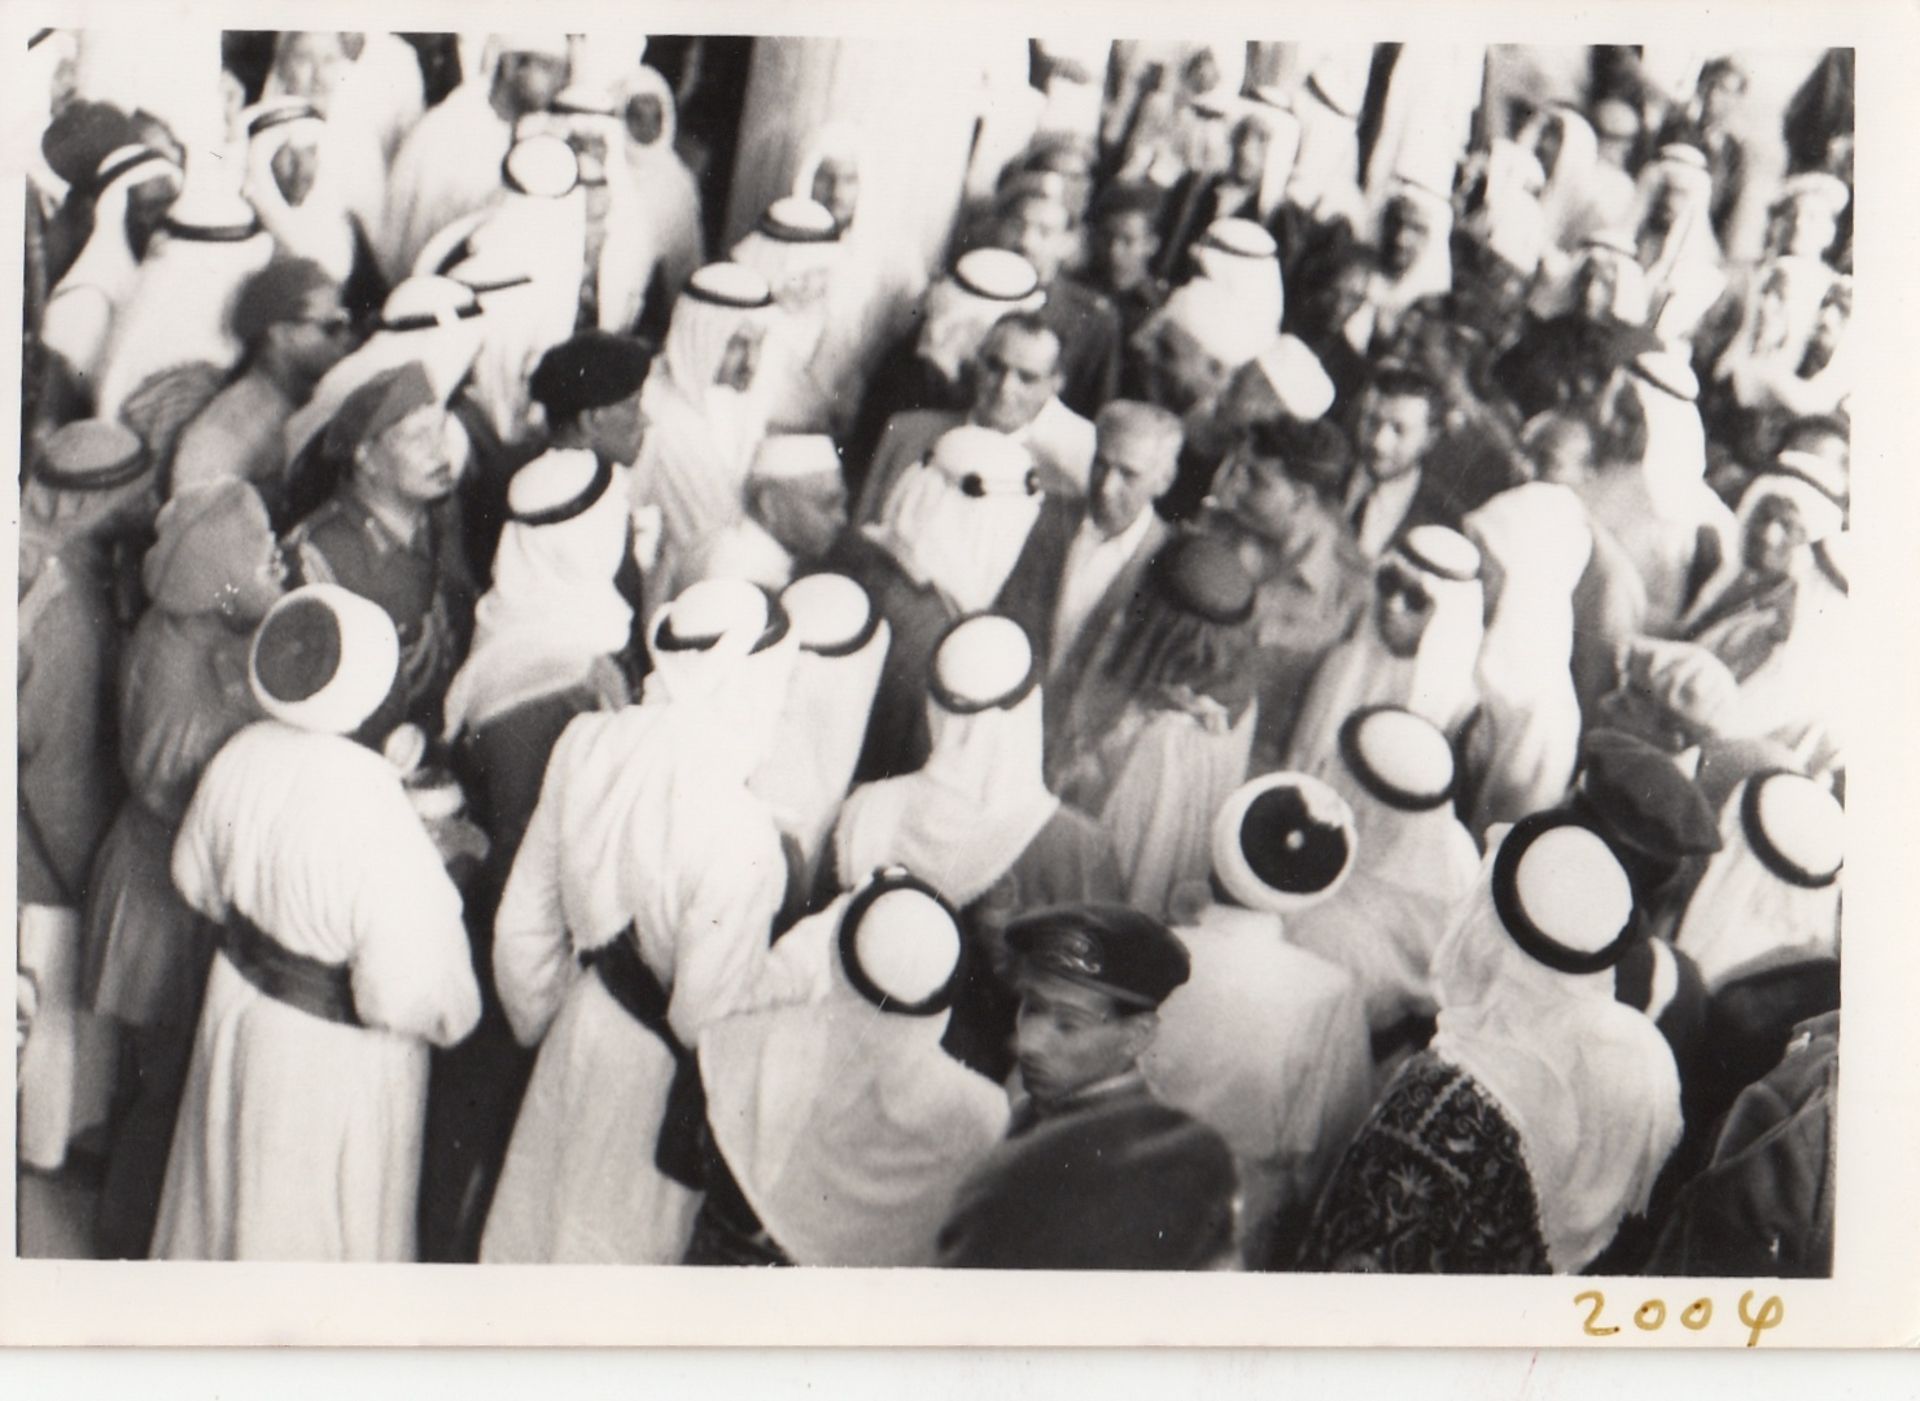 A COLLECTION OF PHOTOGRAPHS OF HIS MAJESTY KING FAISAL BIN ABDUL AZIZ VISITING THE GRAND MOSQUES OF - Image 12 of 24